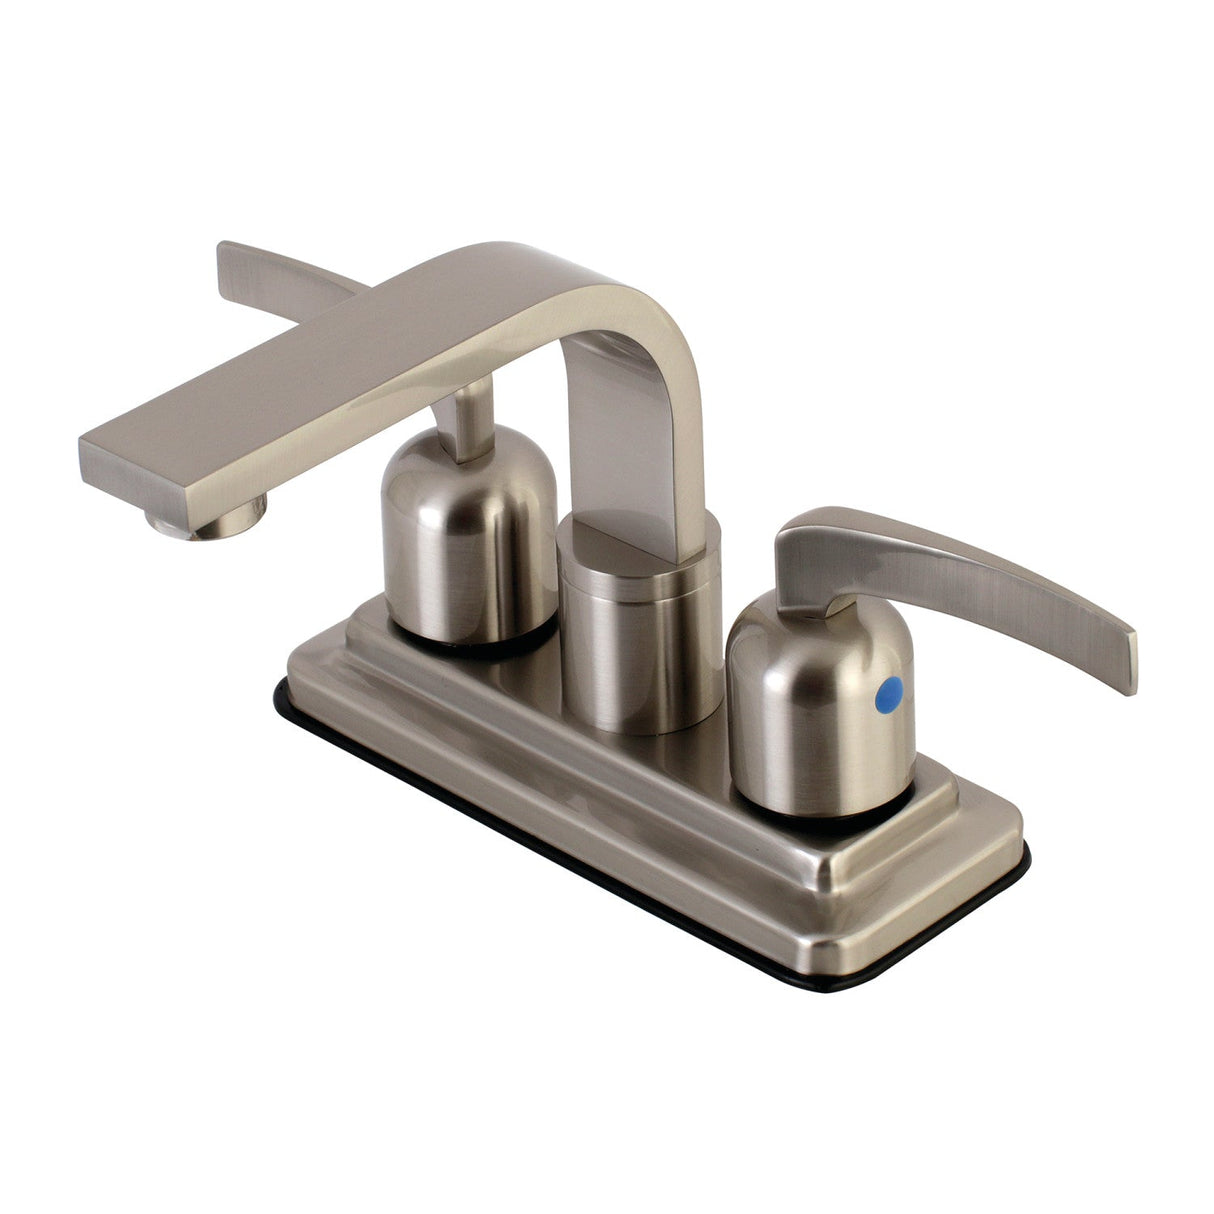 Centurion KB8468EFL Two-Handle 2-Hole Deck Mount 4" Centerset Bathroom Faucet with Push Pop-Up, Brushed Nickel